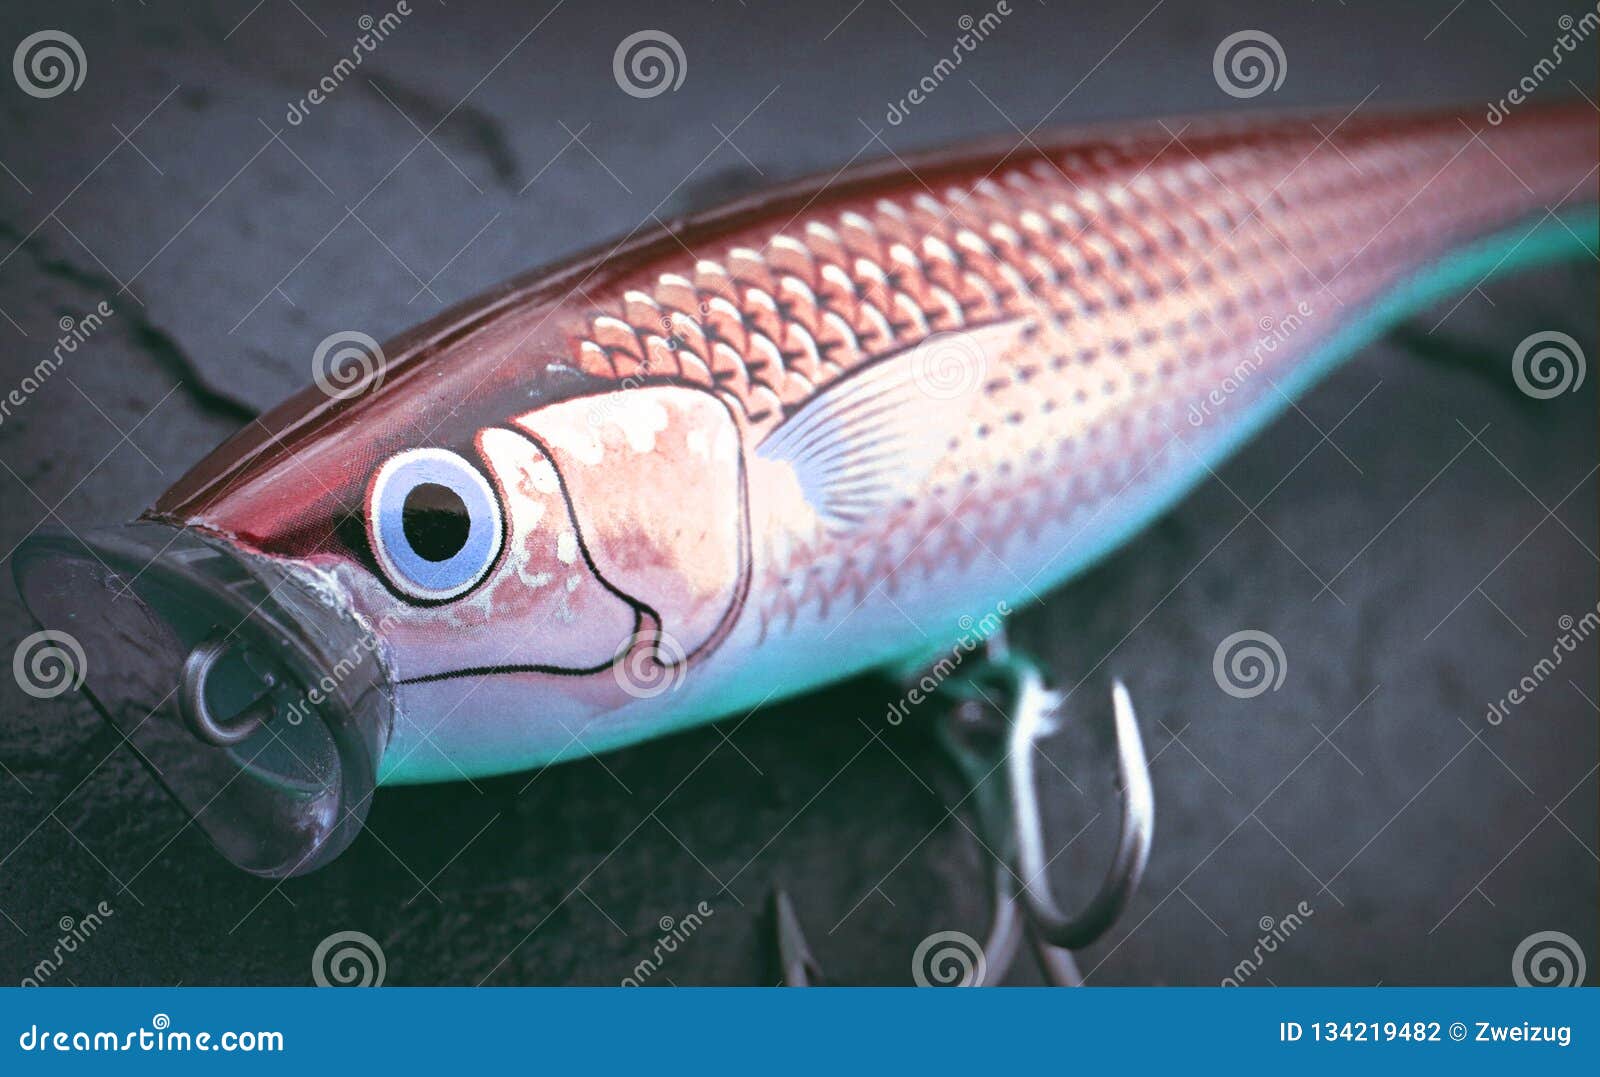 https://thumbs.dreamstime.com/z/large-rapala-fishing-popper-lure-plug-big-saltwater-fish-skitter-pops-poppers-used-topwater-species-134219482.jpg